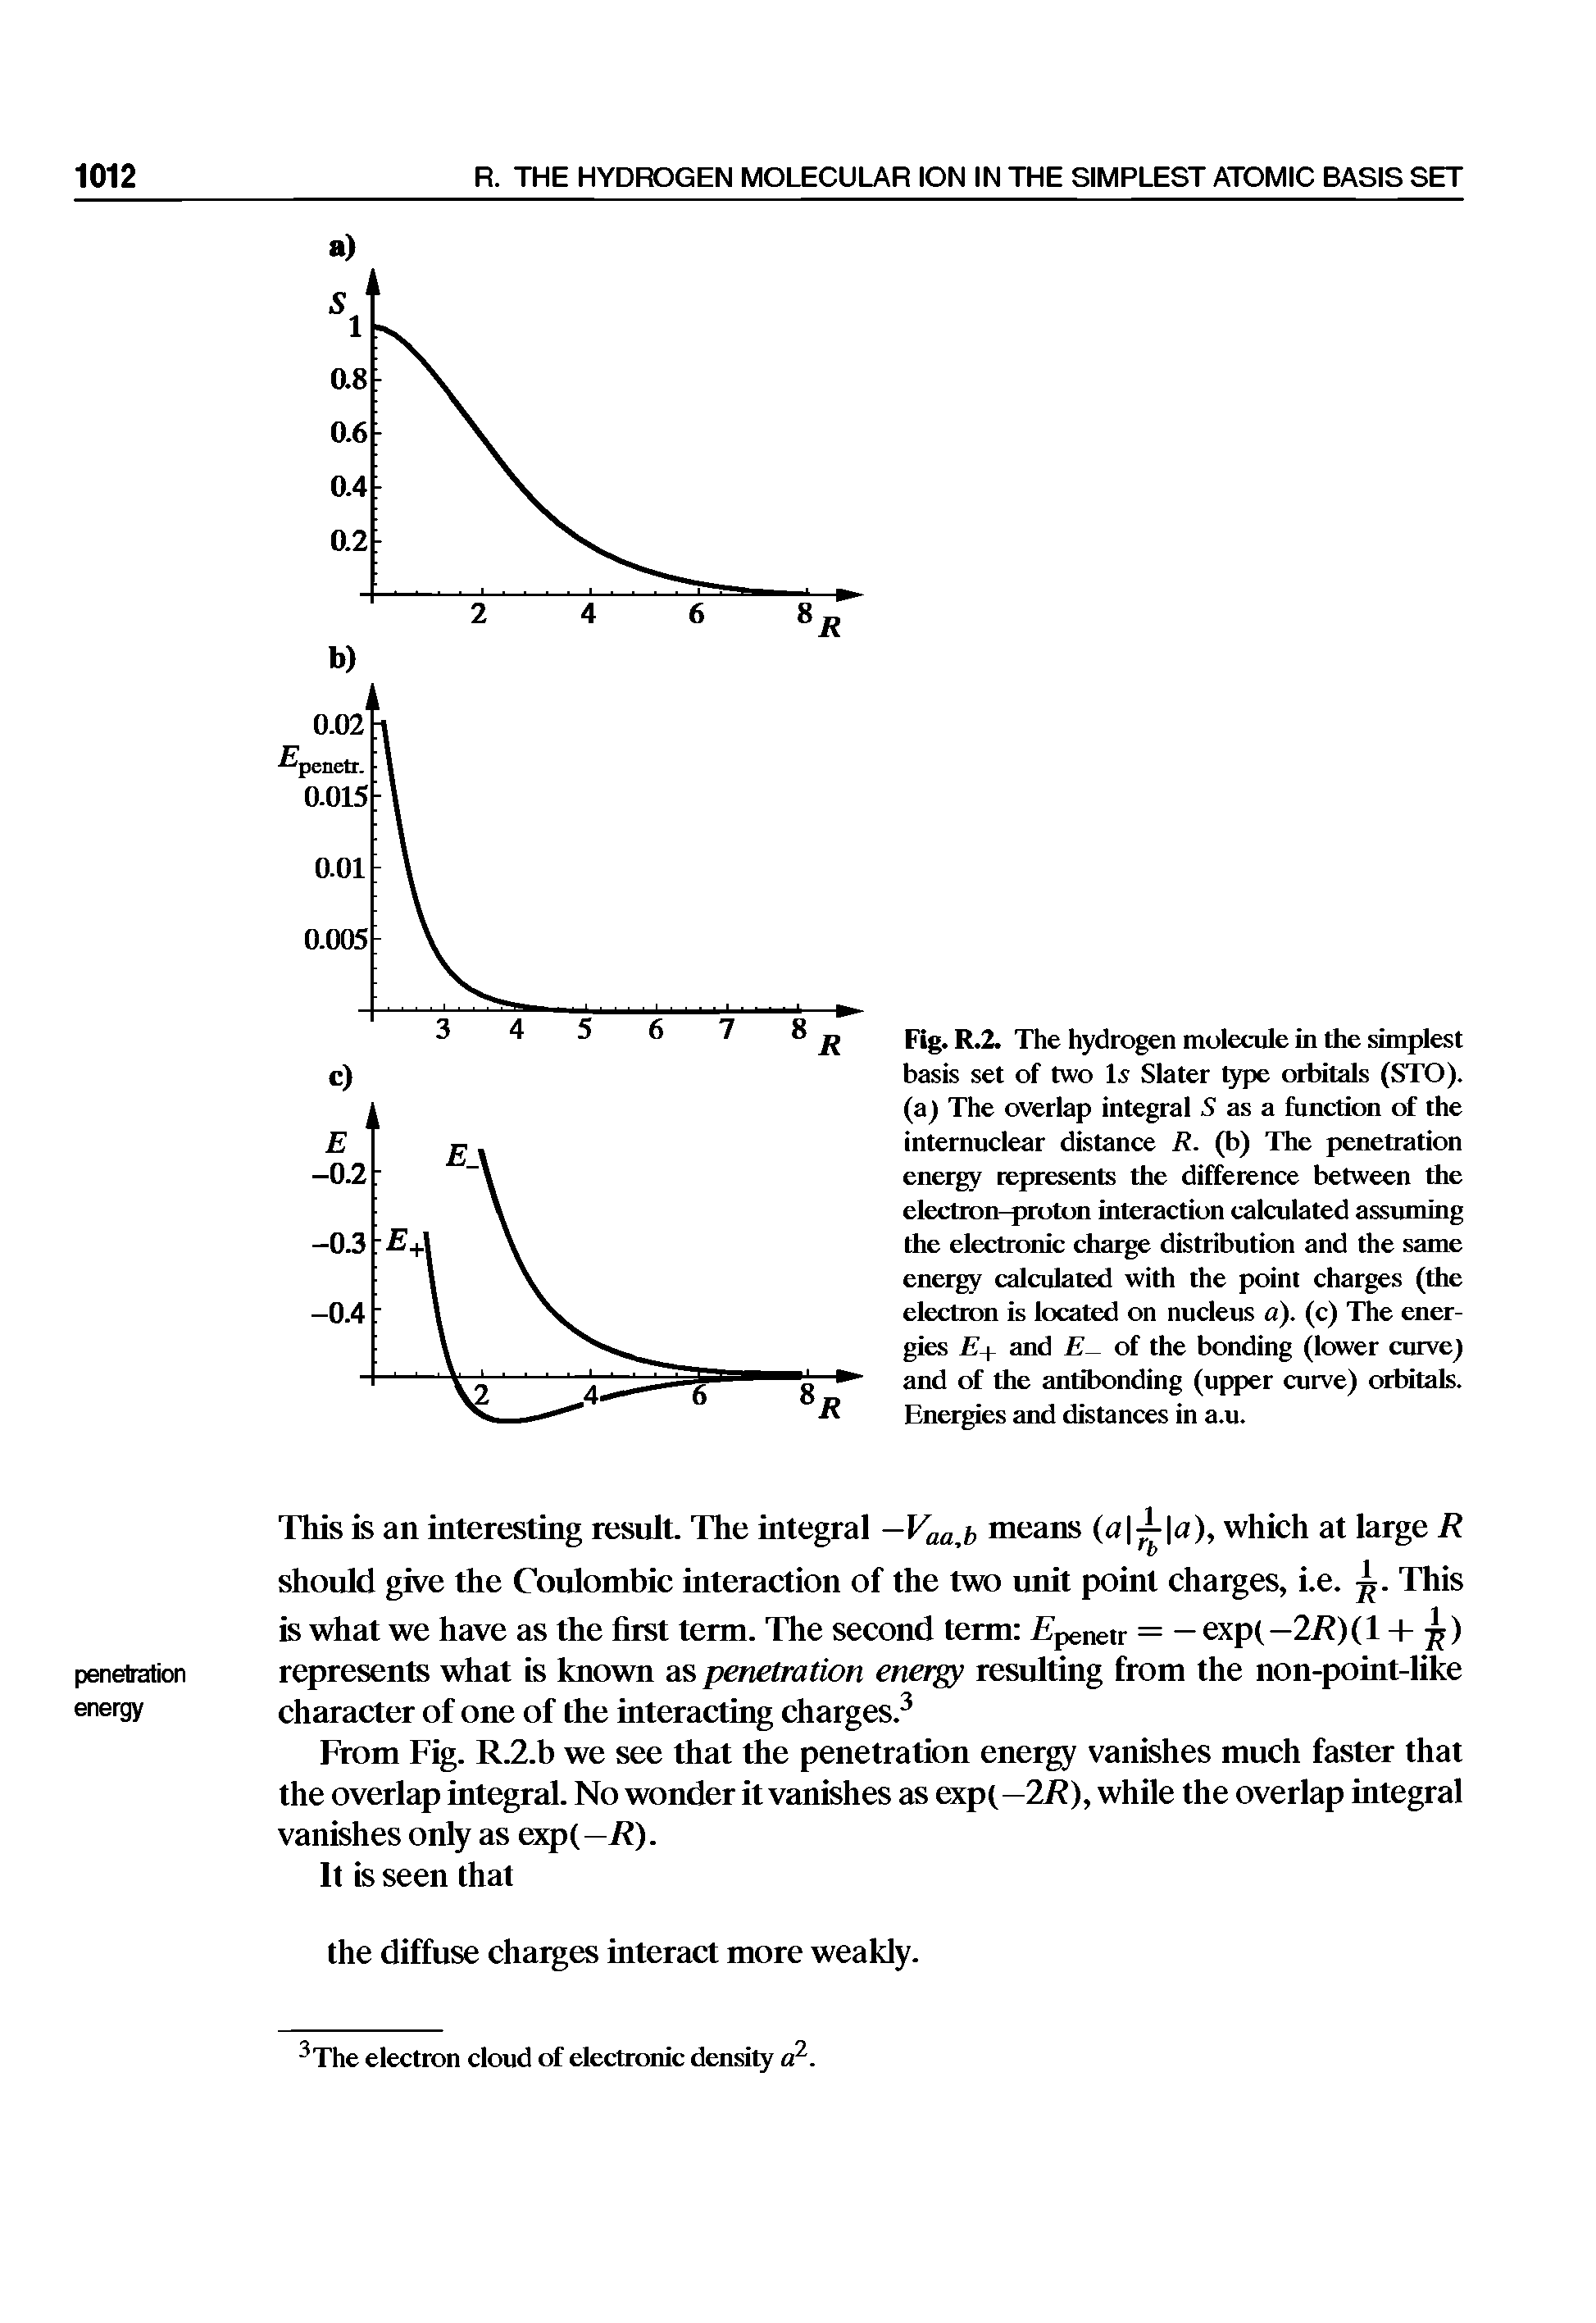 Fig. R.2. The hydrogen molecule in the simplest basis set of two Is Slater type orbitals (STO). (a) The overlap integral S as a function of the intemuclear distance R. (b) The penetration energy represents the difference between the eleetron- roton interaction calculated assuming the eleetronie eharge distribution and the same energy ealculated with the point charges (the eleetron is loeated on nucleus a), (c) The energies + and E- of the bonding (lower curve and of the antibonding (upper curve) orbitals. Energies and distances in a.u.